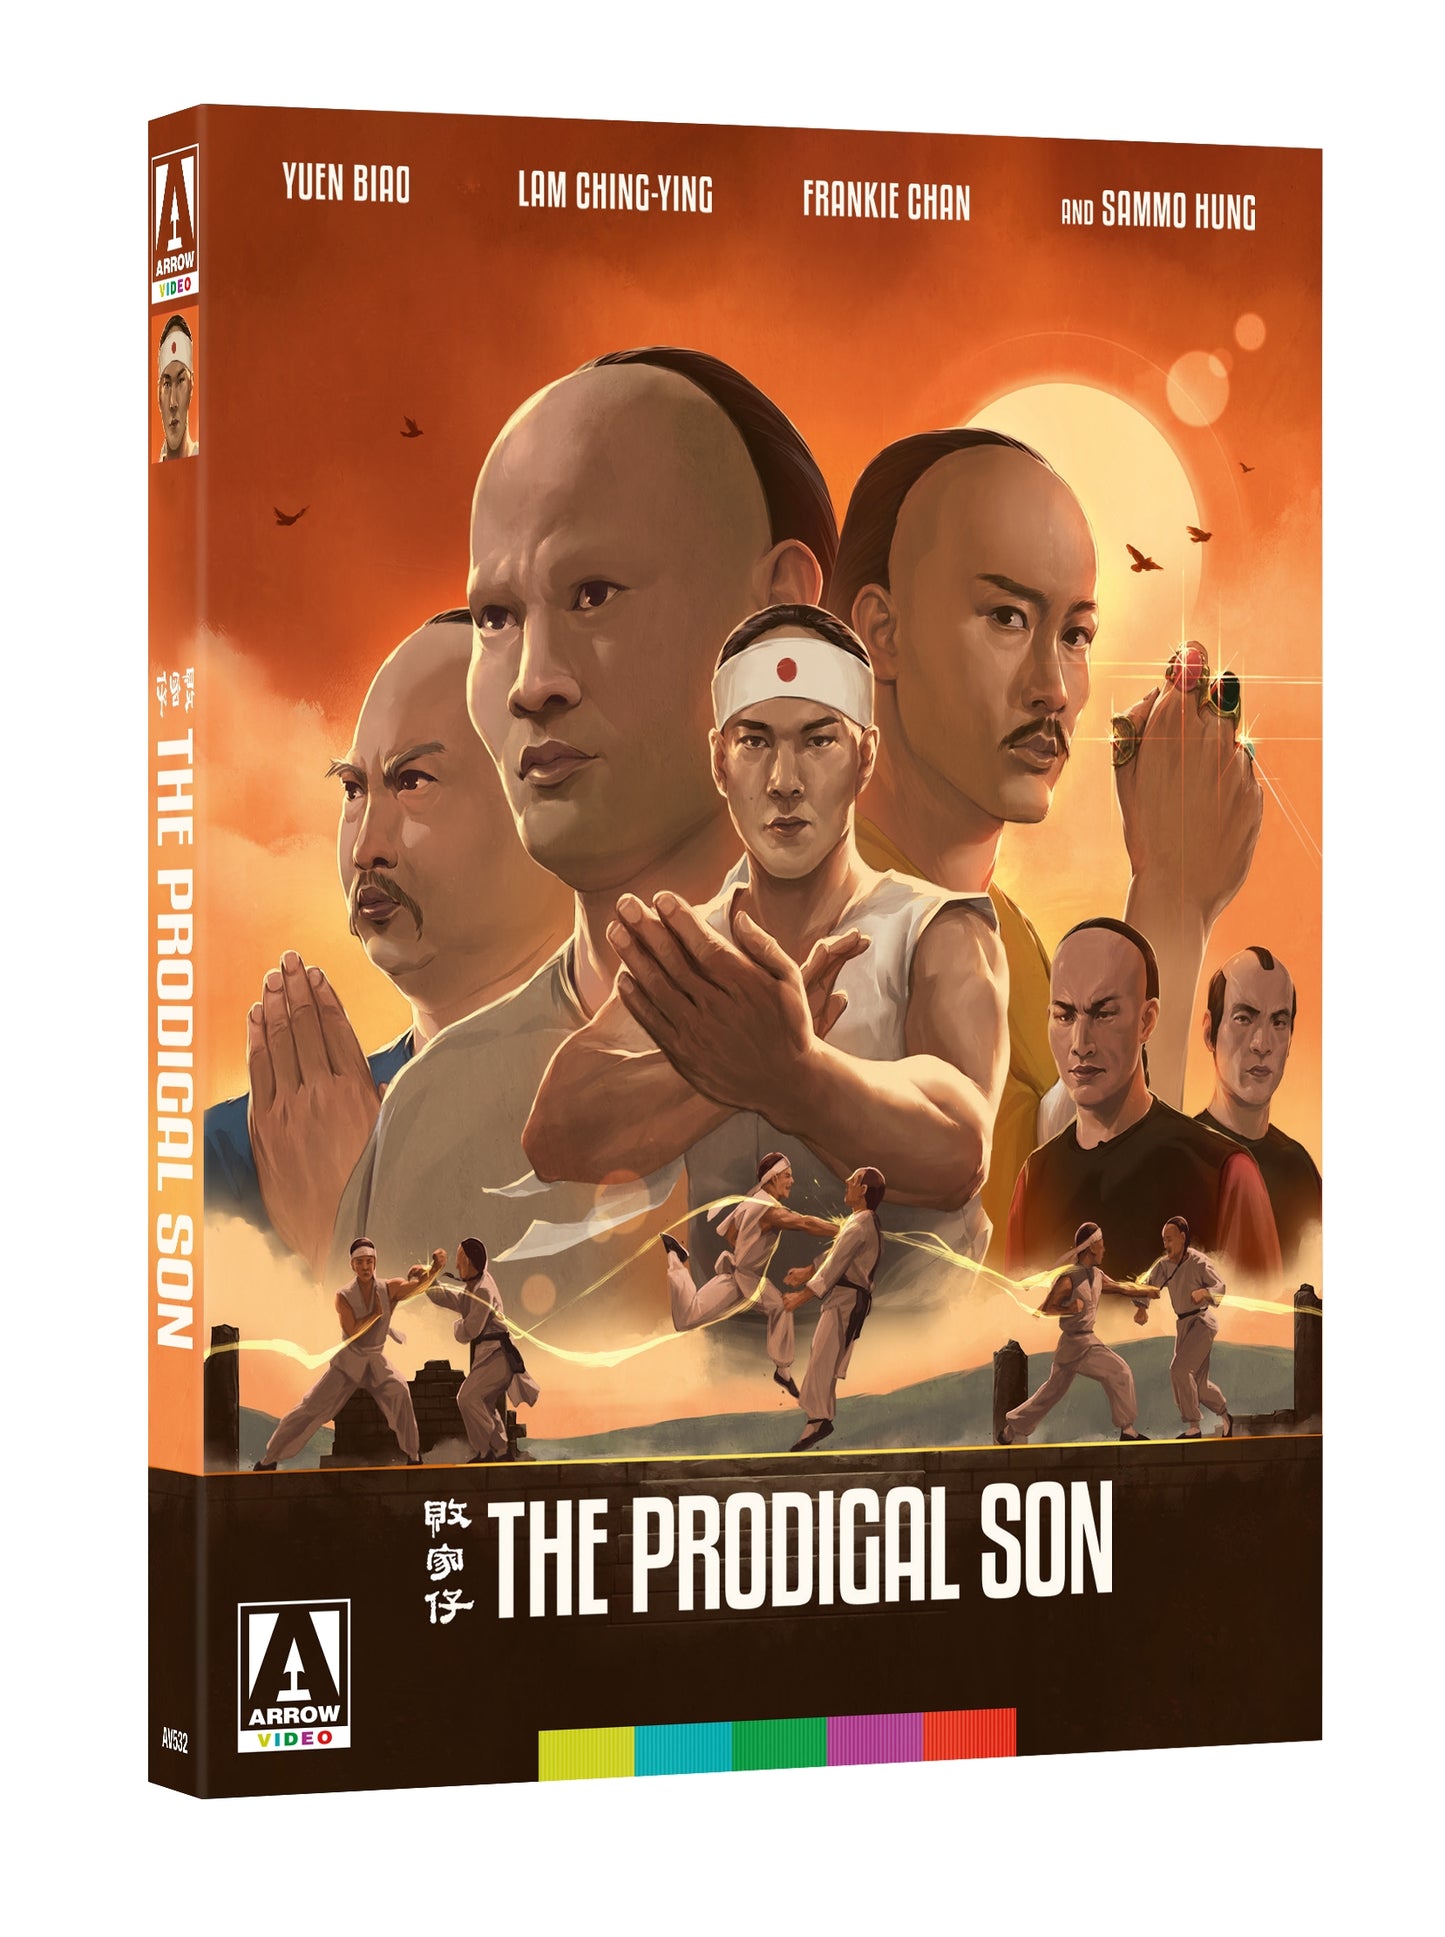 The Prodigal Son Limited Edition Blu-ray with Slipcover (Arrow U.S.)